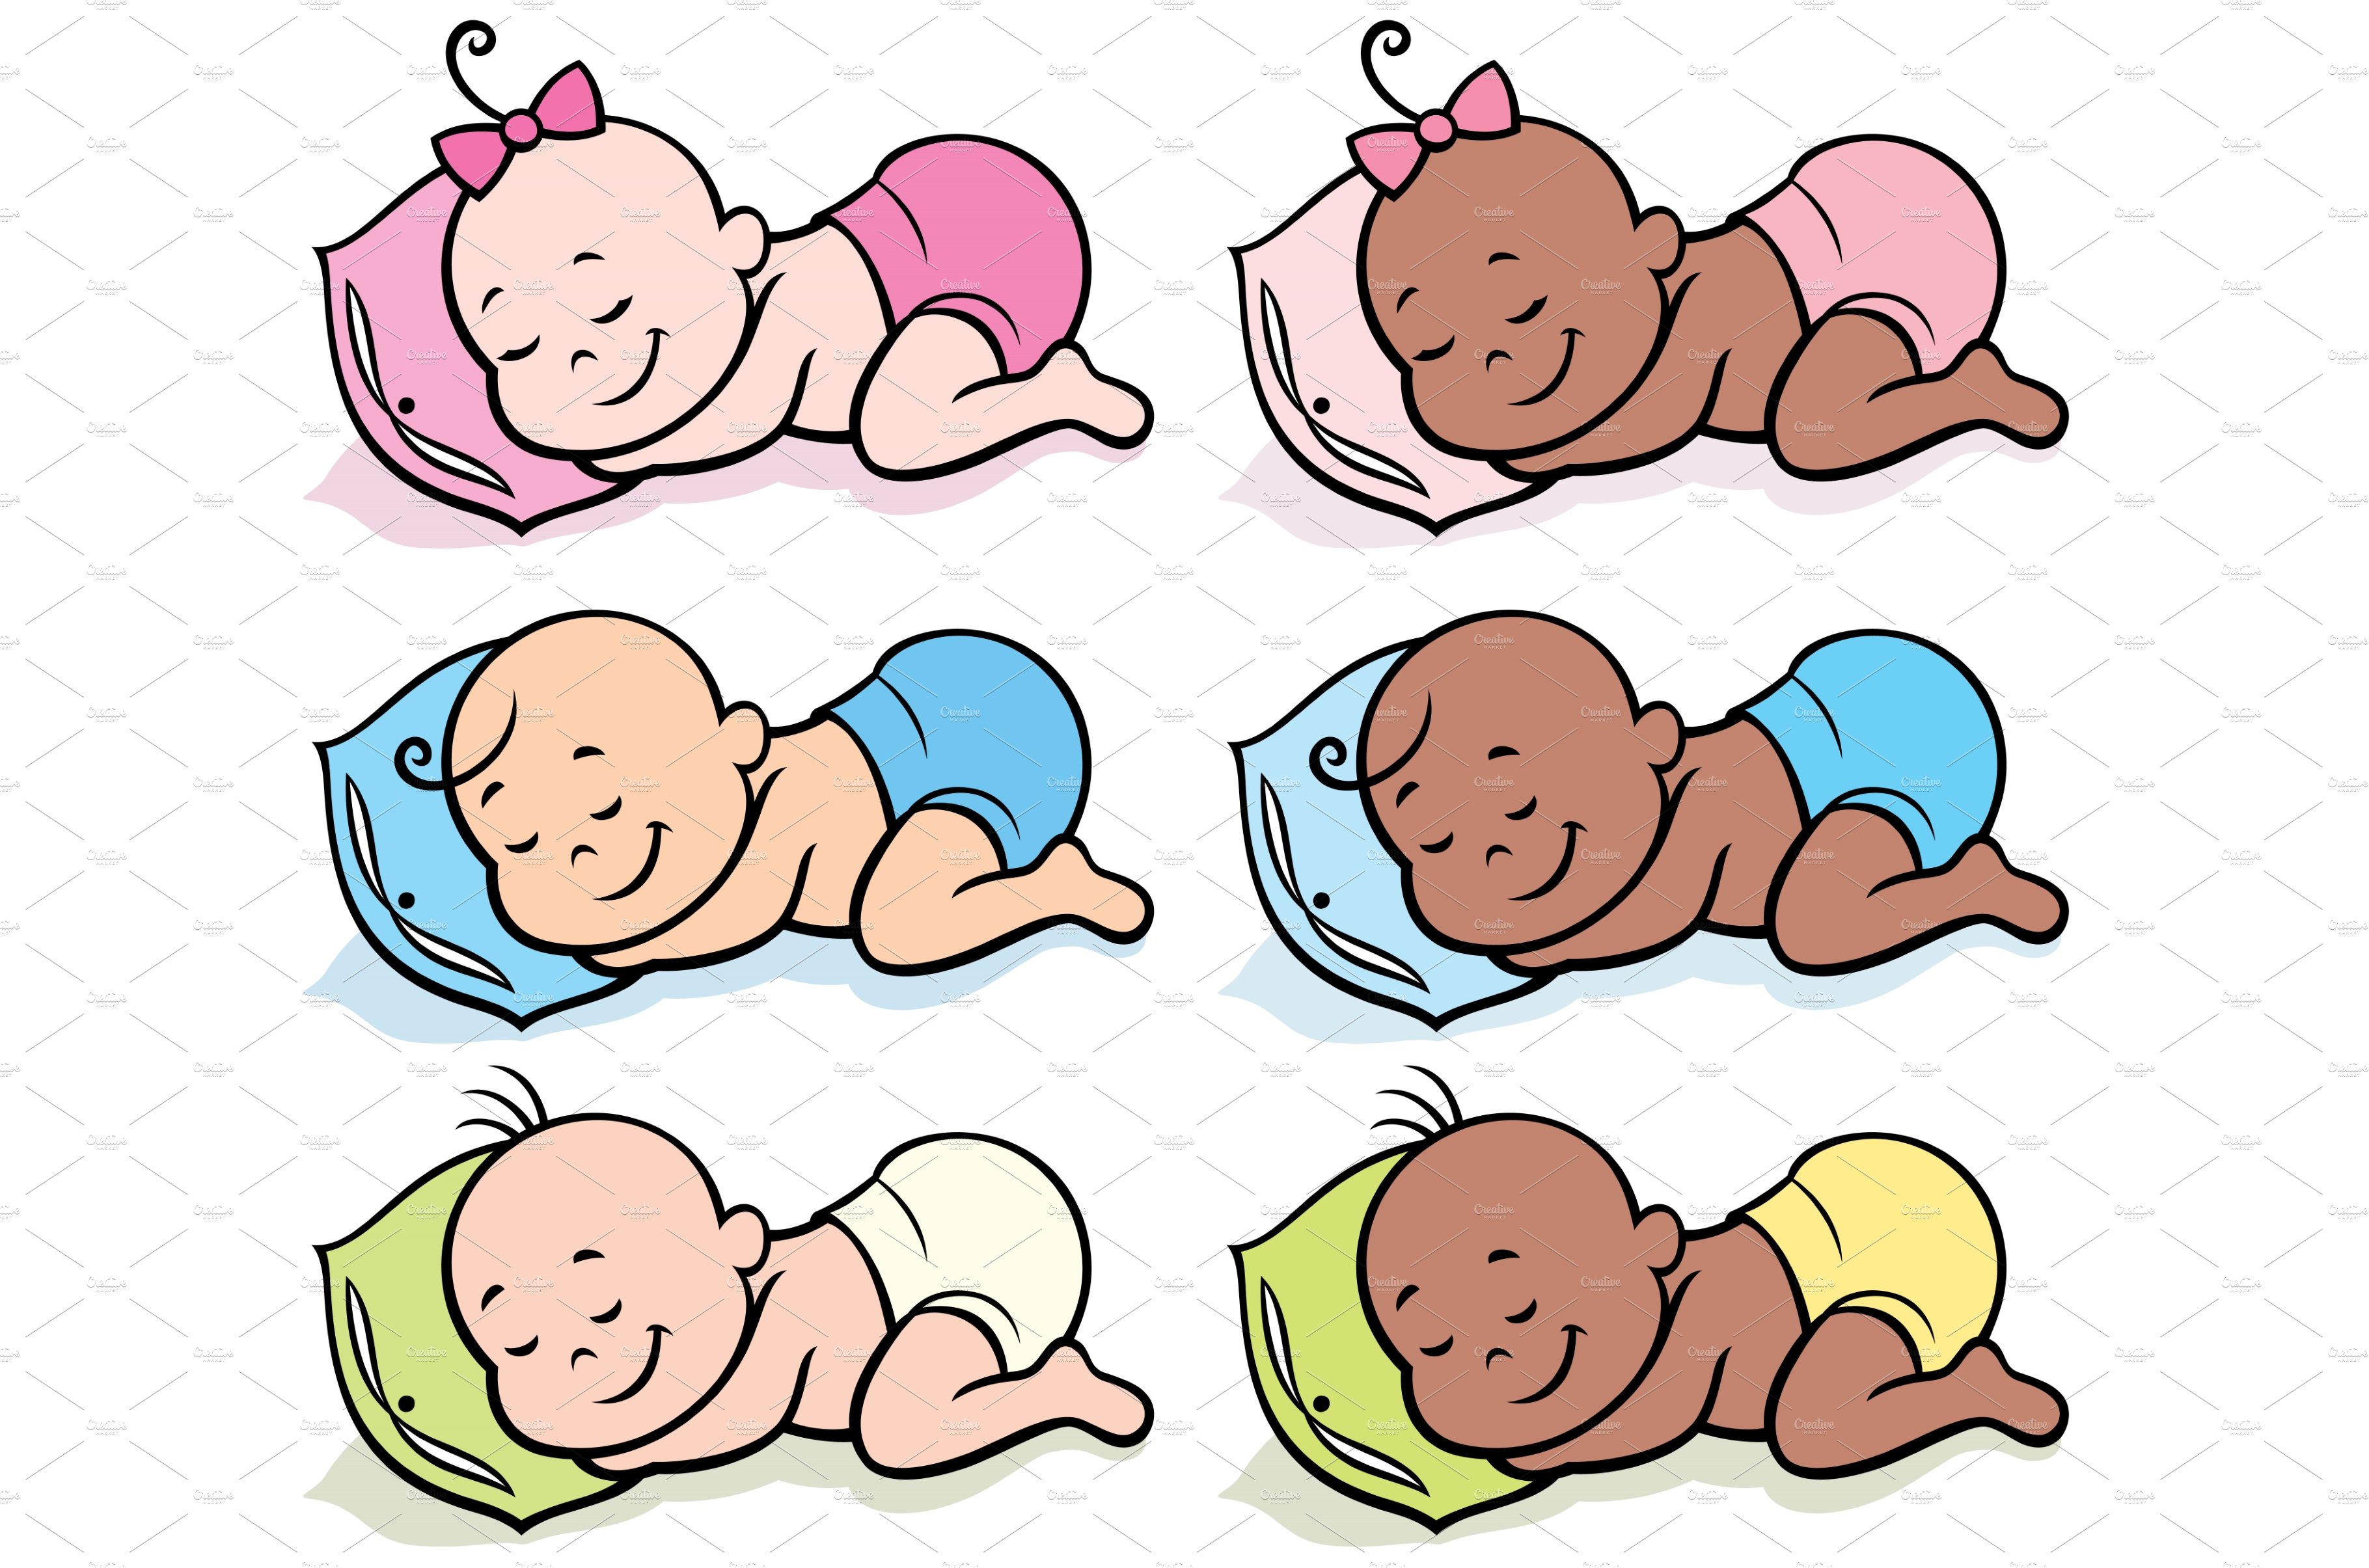 Sleeping Babies in Diapers cover image.